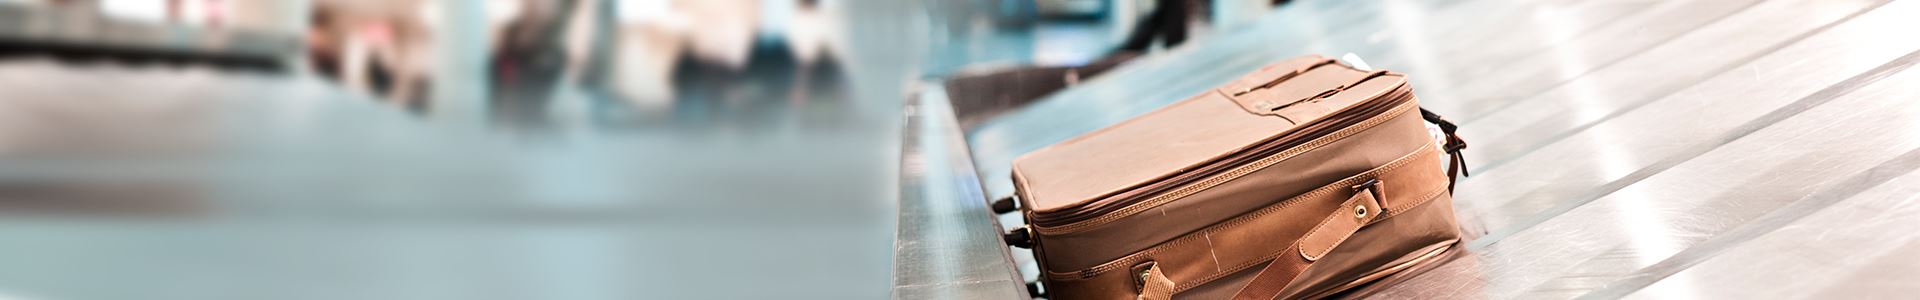 The image shows a brown suitcase lying on an airport luggage conveyor belt. Next to it there are no other suitcases. 